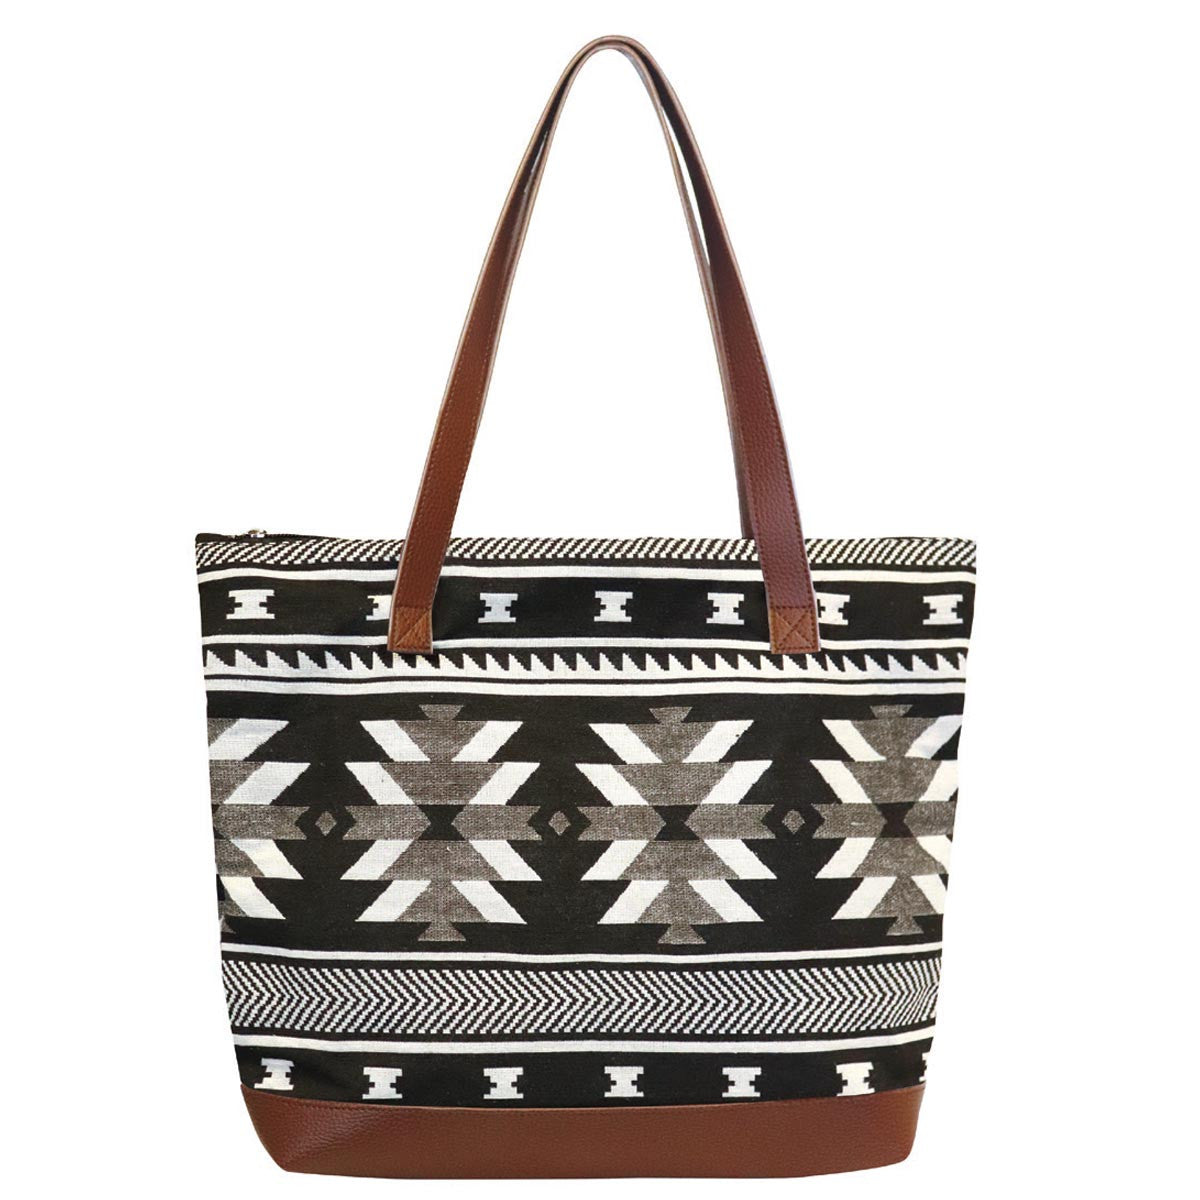 Woven Tote Bag - by Leila Stogan